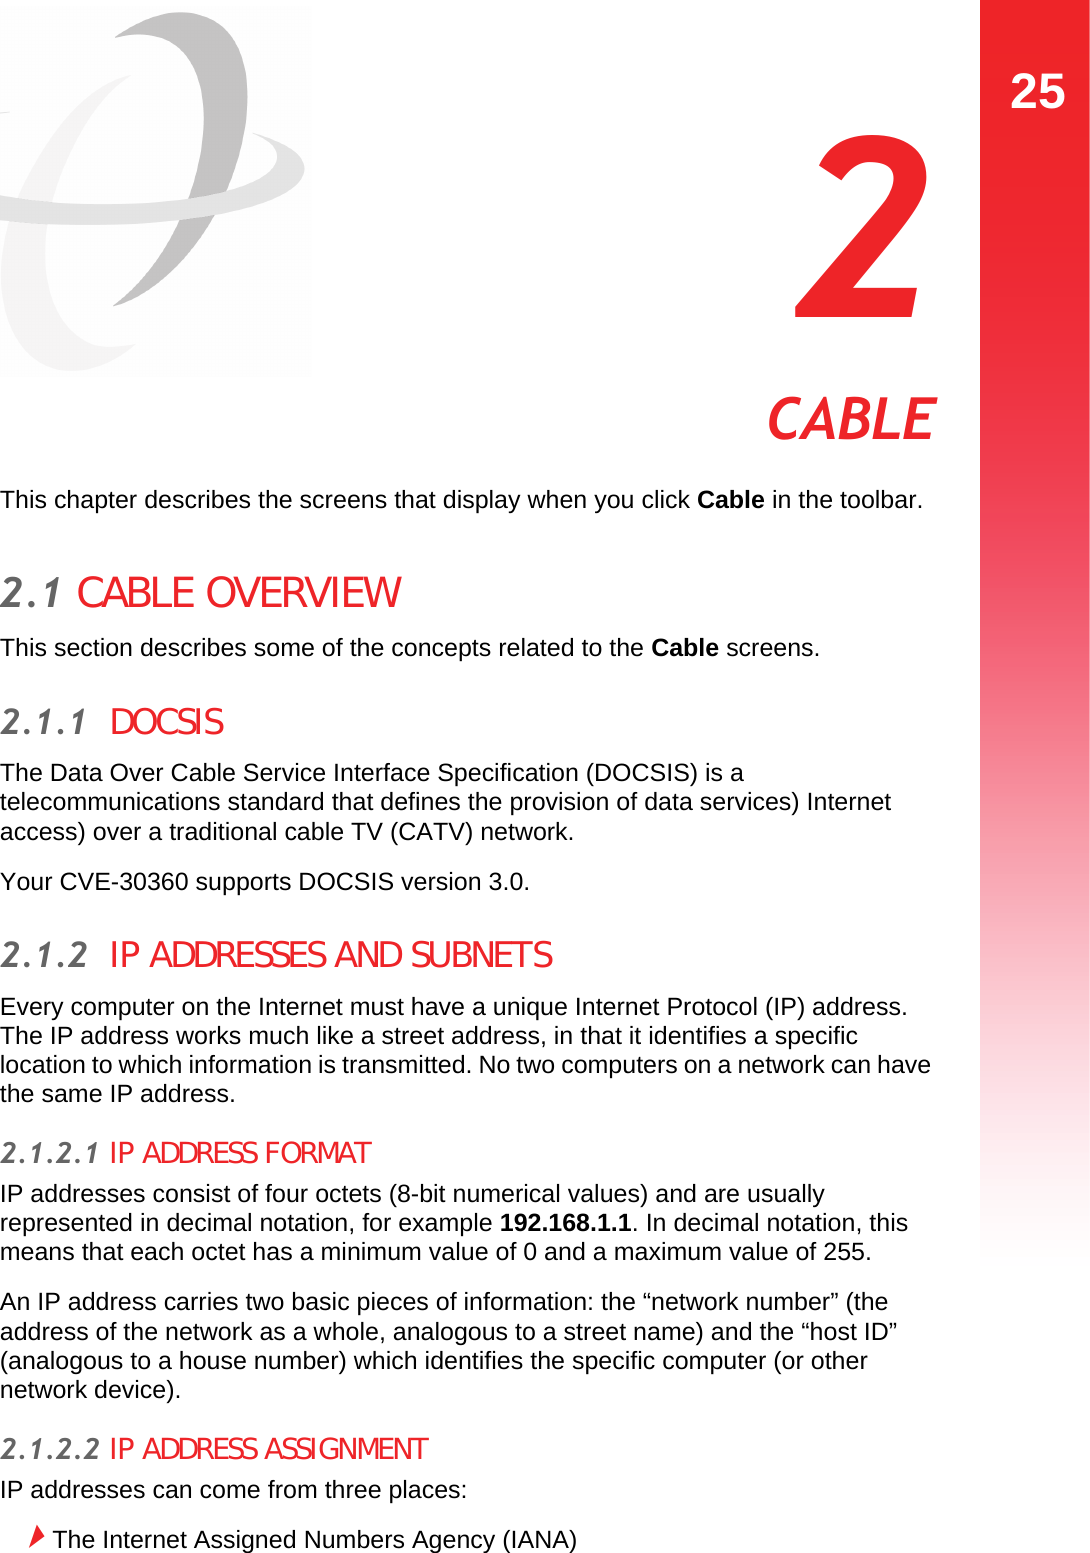 25CABLE  2 CABLEThis chapter describes the screens that display when you click Cable in the toolbar.2.1 CABLE OVERVIEWThis section describes some of the concepts related to the Cable screens.2.1.1  DOCSISThe Data Over Cable Service Interface Specification (DOCSIS) is a telecommunications standard that defines the provision of data services) Internet access) over a traditional cable TV (CATV) network.Your CVE-30360 supports DOCSIS version 3.0.2.1.2  IP ADDRESSES AND SUBNETSEvery computer on the Internet must have a unique Internet Protocol (IP) address. The IP address works much like a street address, in that it identifies a specific location to which information is transmitted. No two computers on a network can have the same IP address.2.1.2.1 IP ADDRESS FORMATIP addresses consist of four octets (8-bit numerical values) and are usually represented in decimal notation, for example 192.168.1.1. In decimal notation, this means that each octet has a minimum value of 0 and a maximum value of 255.An IP address carries two basic pieces of information: the “network number” (the address of the network as a whole, analogous to a street name) and the “host ID” (analogous to a house number) which identifies the specific computer (or other network device).2.1.2.2 IP ADDRESS ASSIGNMENTIP addresses can come from three places:The Internet Assigned Numbers Agency (IANA)